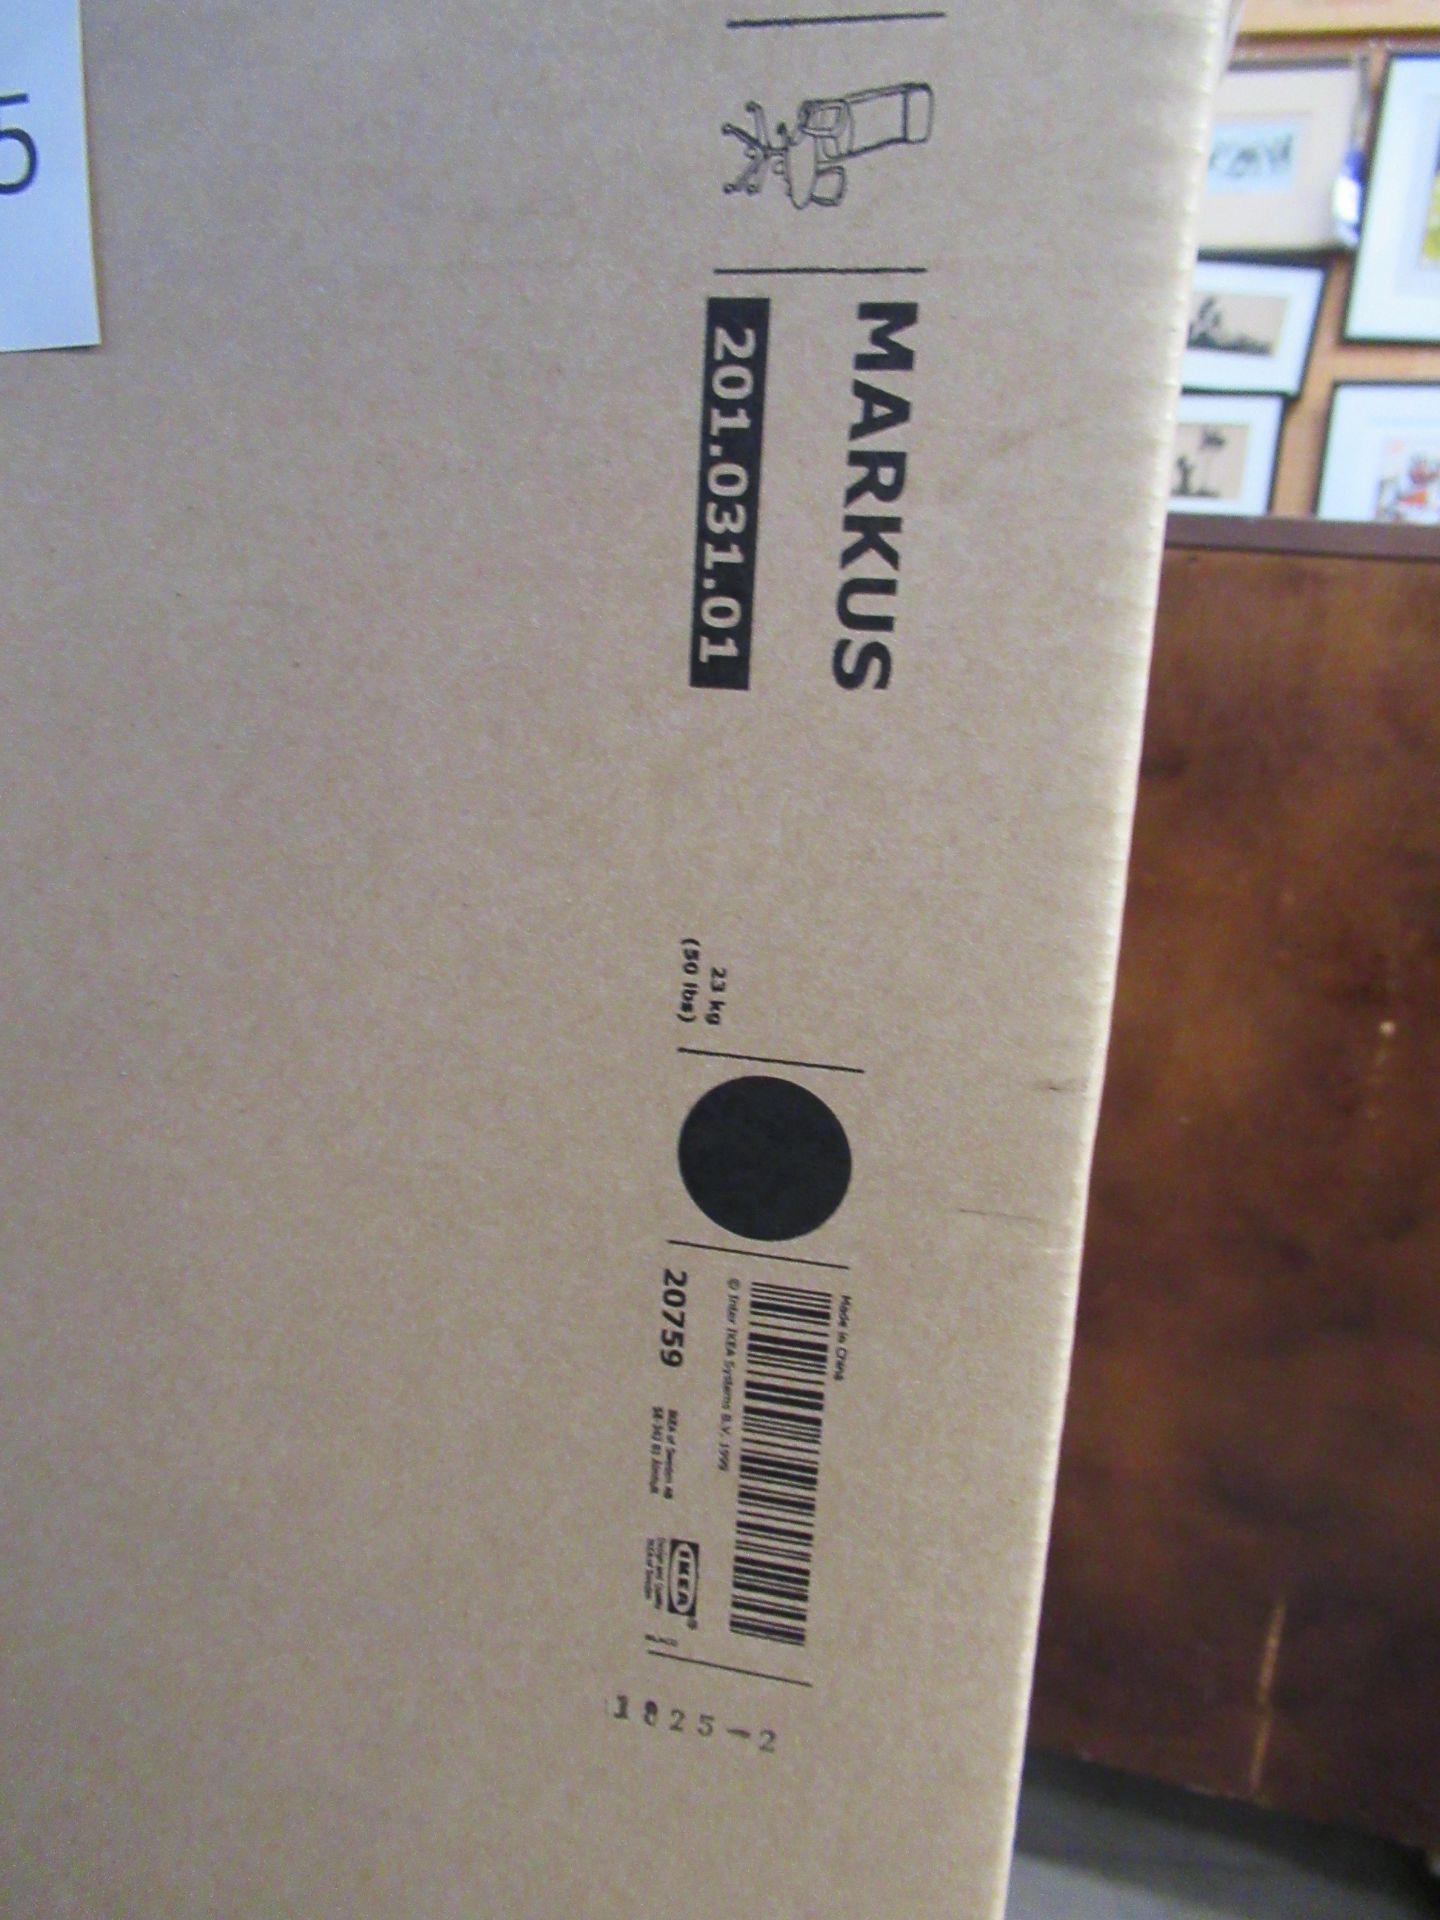 Ikea Markus Office Chair RP £179.99 - Image 2 of 2